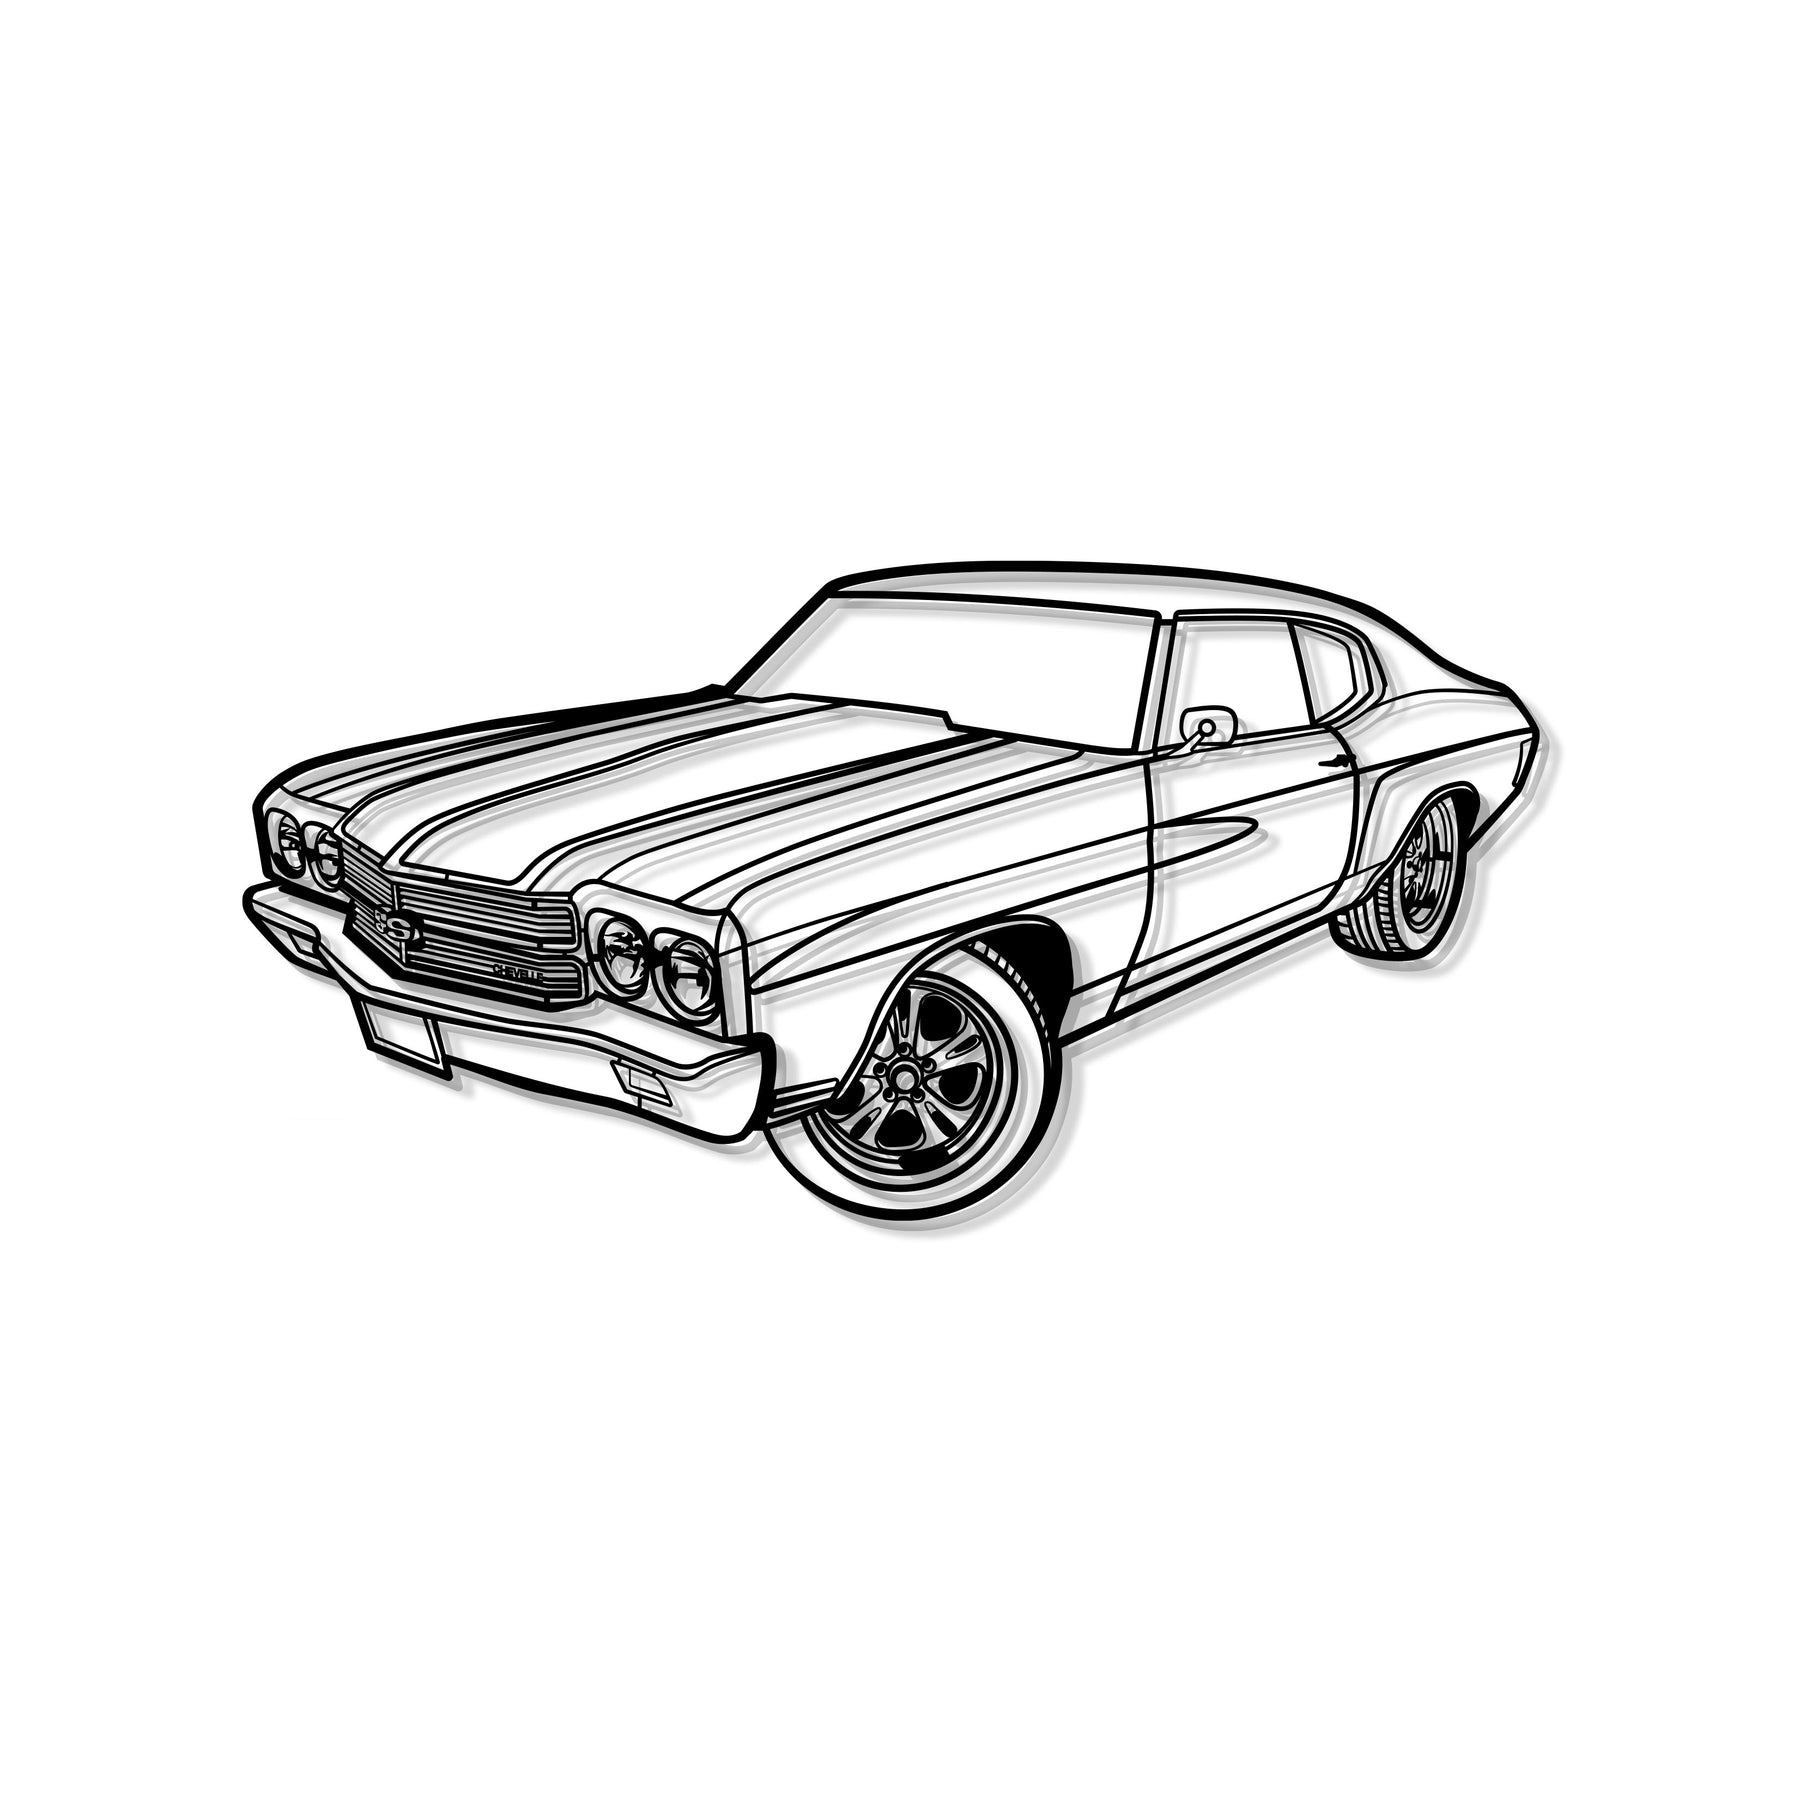 1970 Chevelle SS Perspective Metal Car Wall Art - MT1252